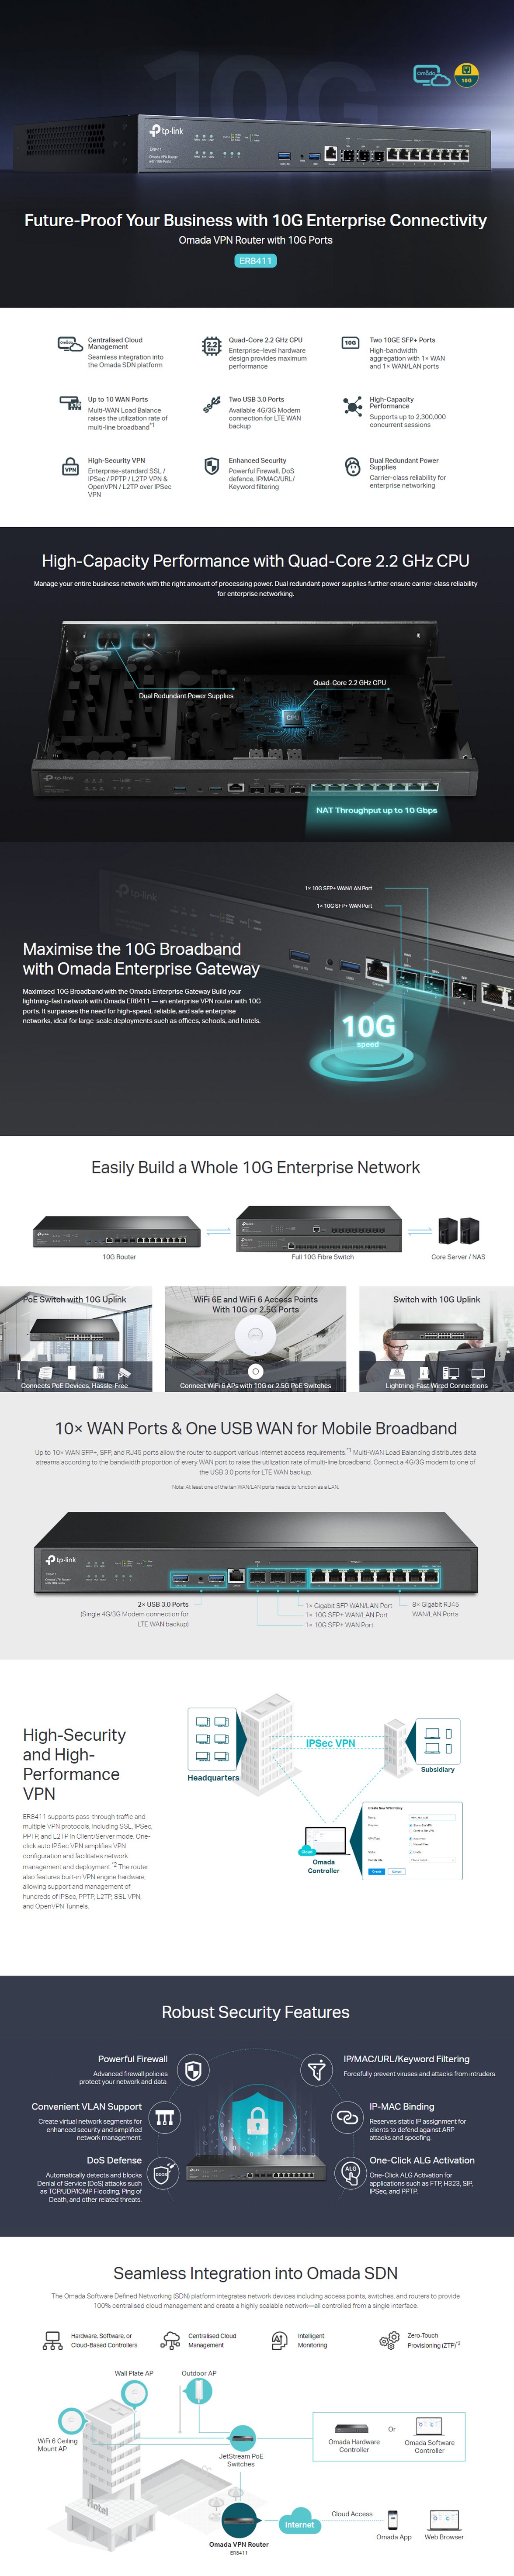 A large marketing image providing additional information about the product TP-Link Omada ER8411 - Gigabit VPN Router with 10GbE - Additional alt info not provided